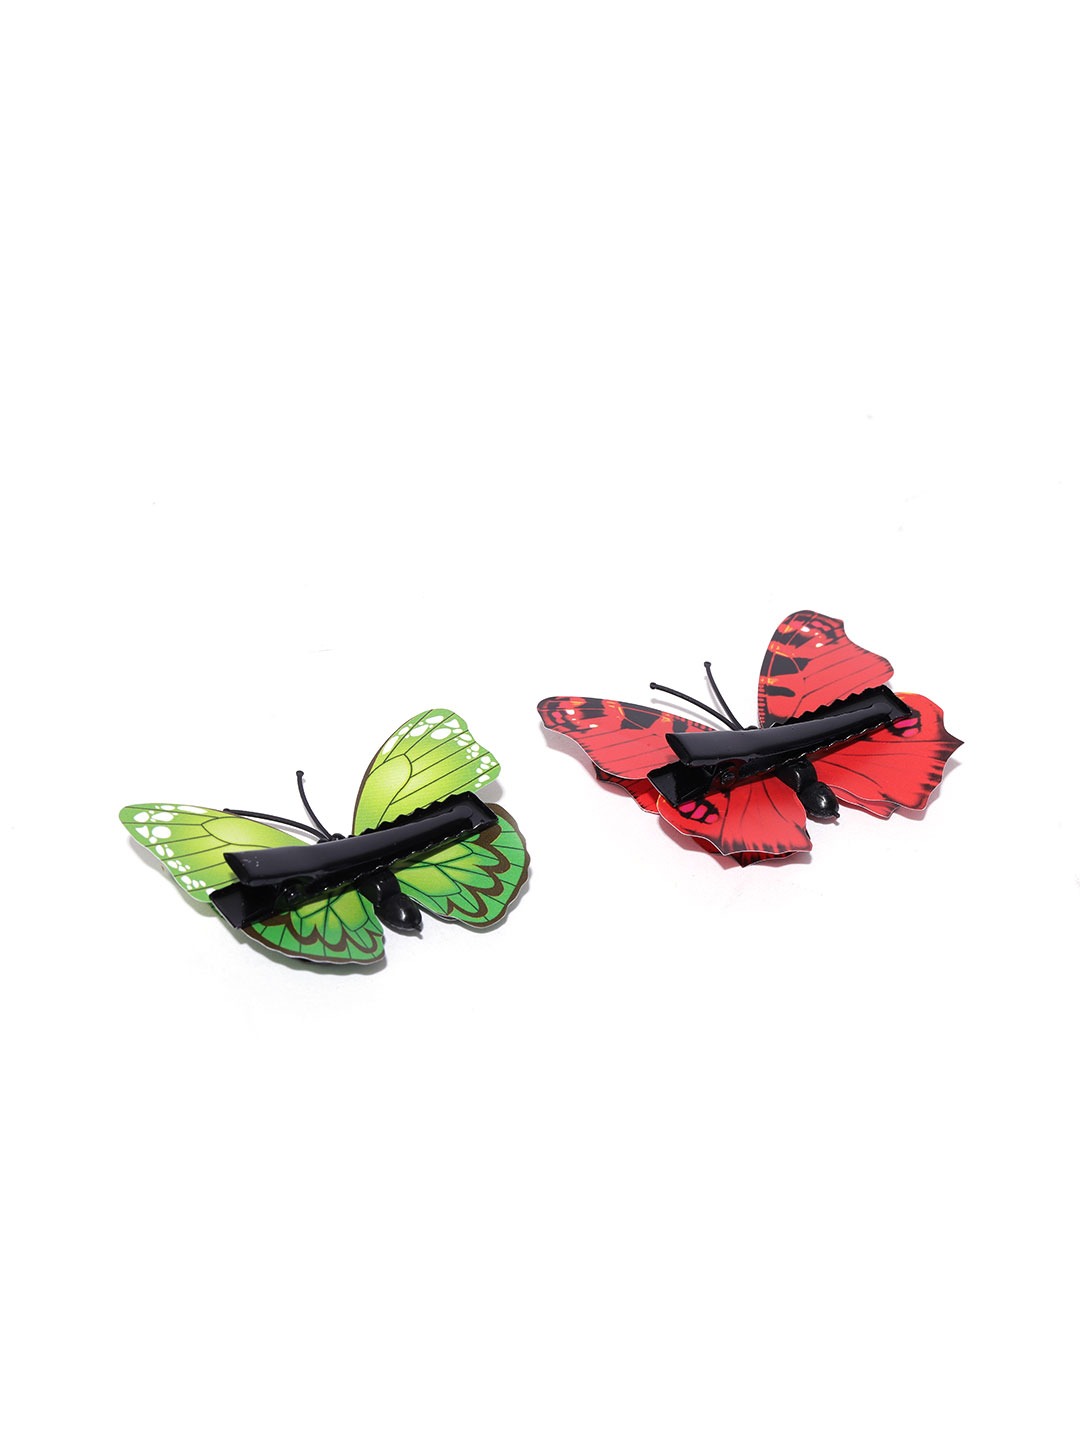 Blueberry KIDS set of 2 multi color butterfly alligator hair clips